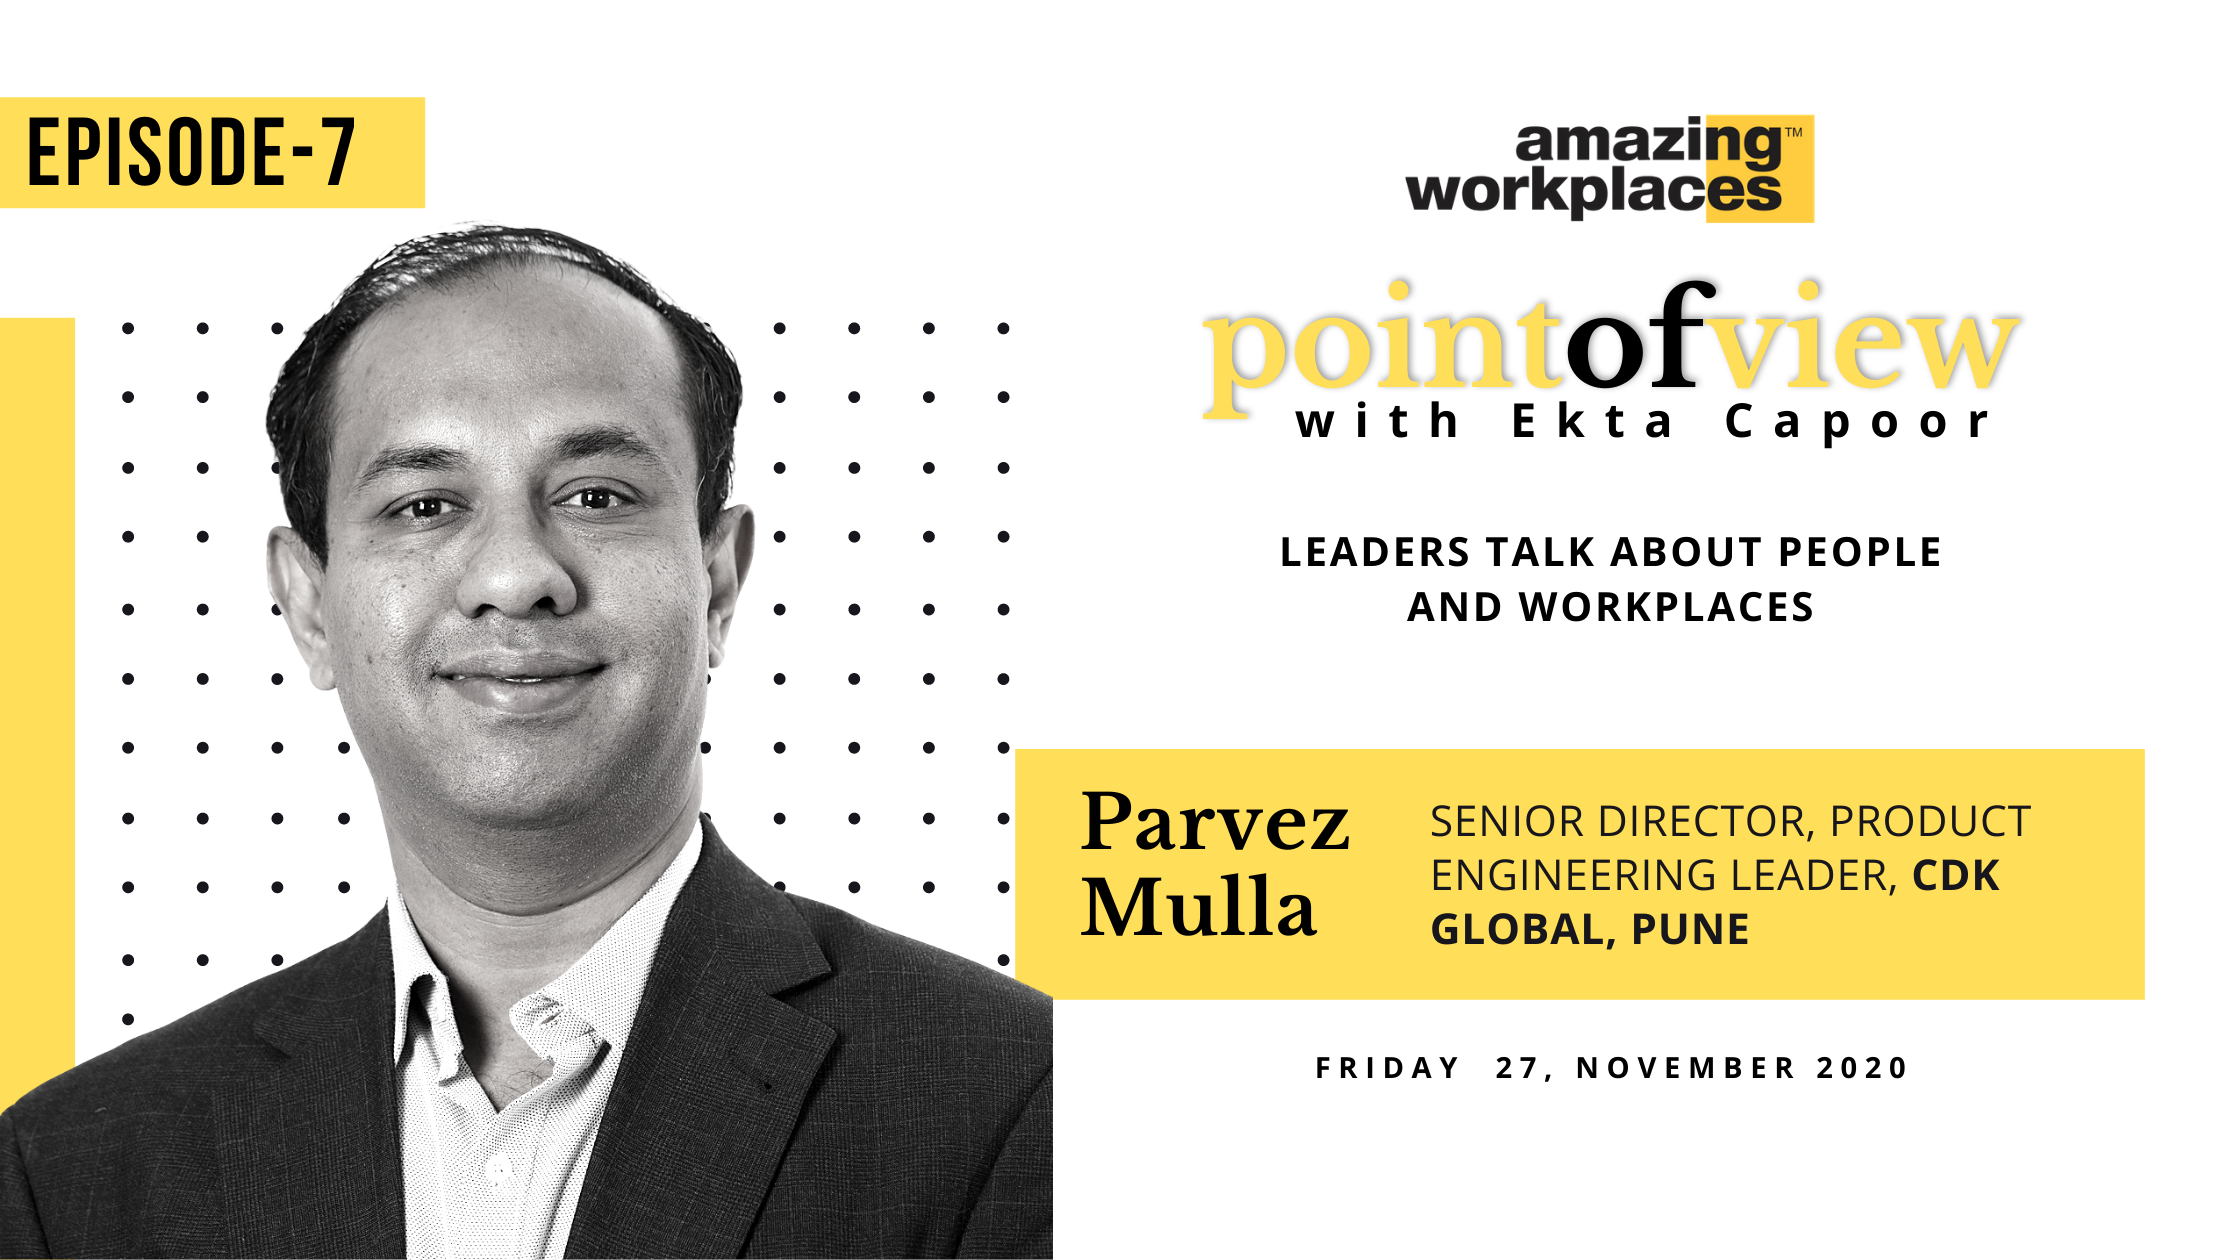 Point-of-View-Episode-7-Parvez-Mulla-CDK Global-Amazing-Workplaces